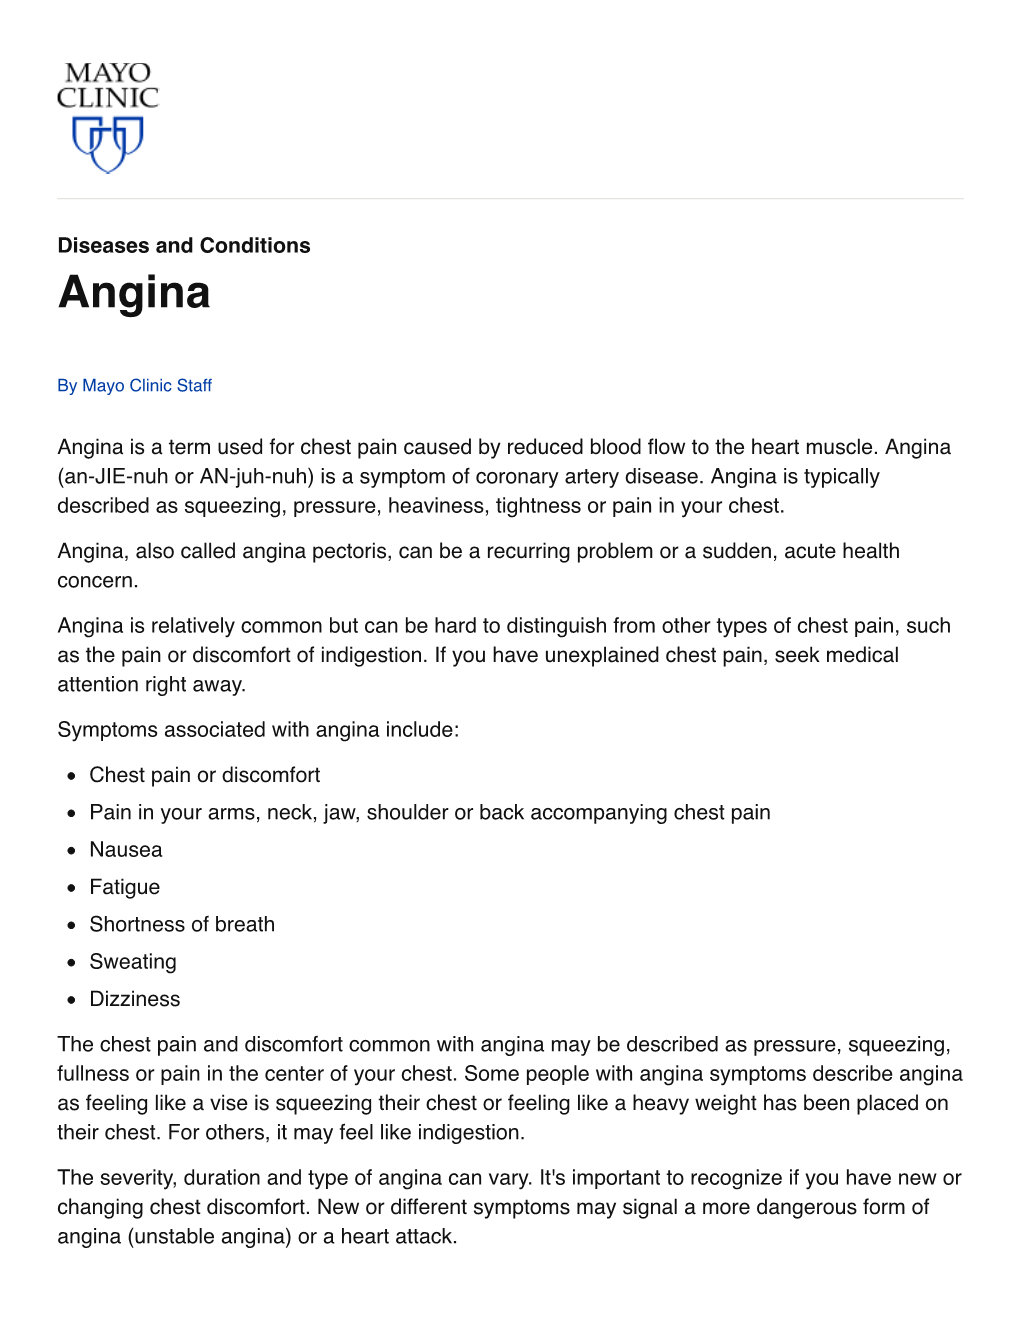 Angina Symptoms Describe Angina As Feeling Like a Vise Is Squeezing Their Chest Or Feeling Like a Heavy Weight Has Been Placed on Their Chest